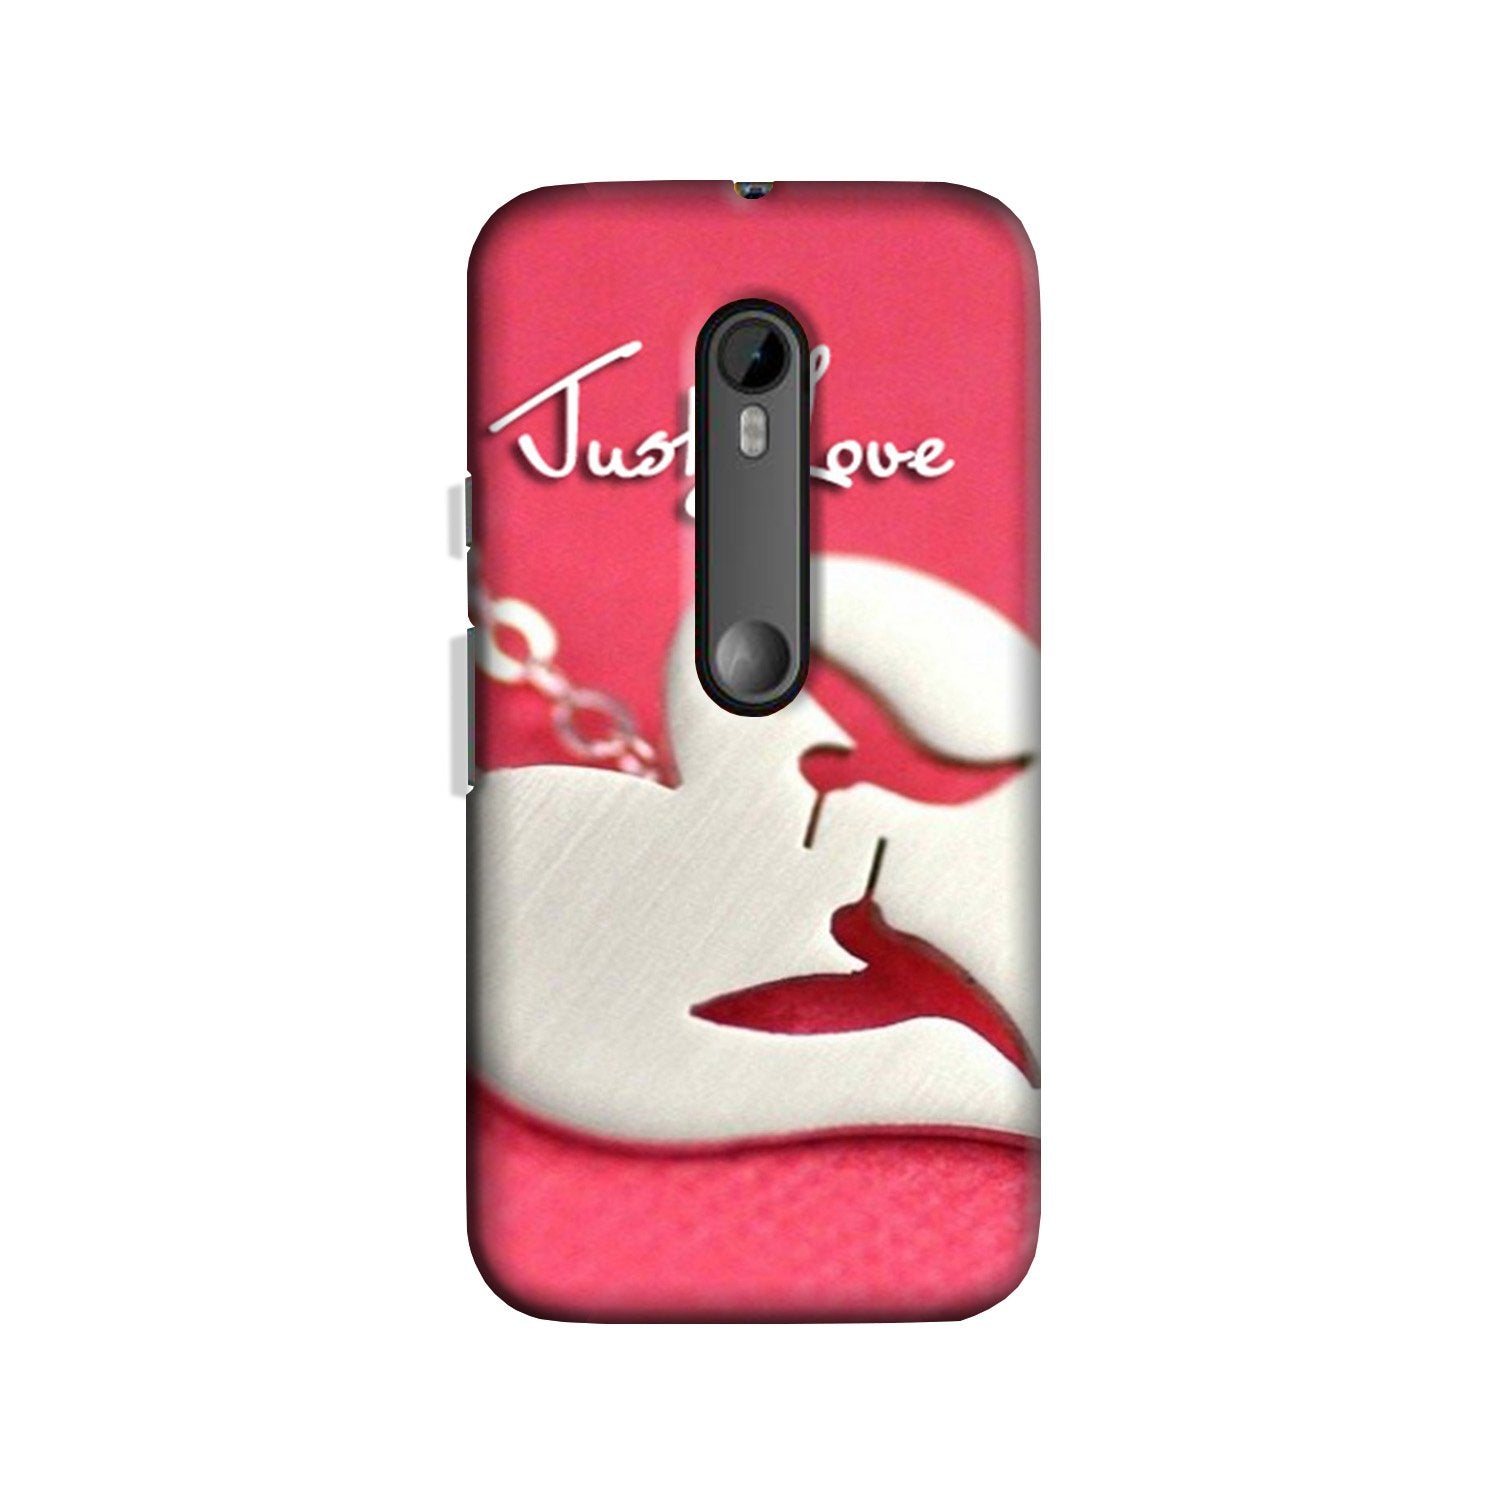 Just love Case for Moto X Style